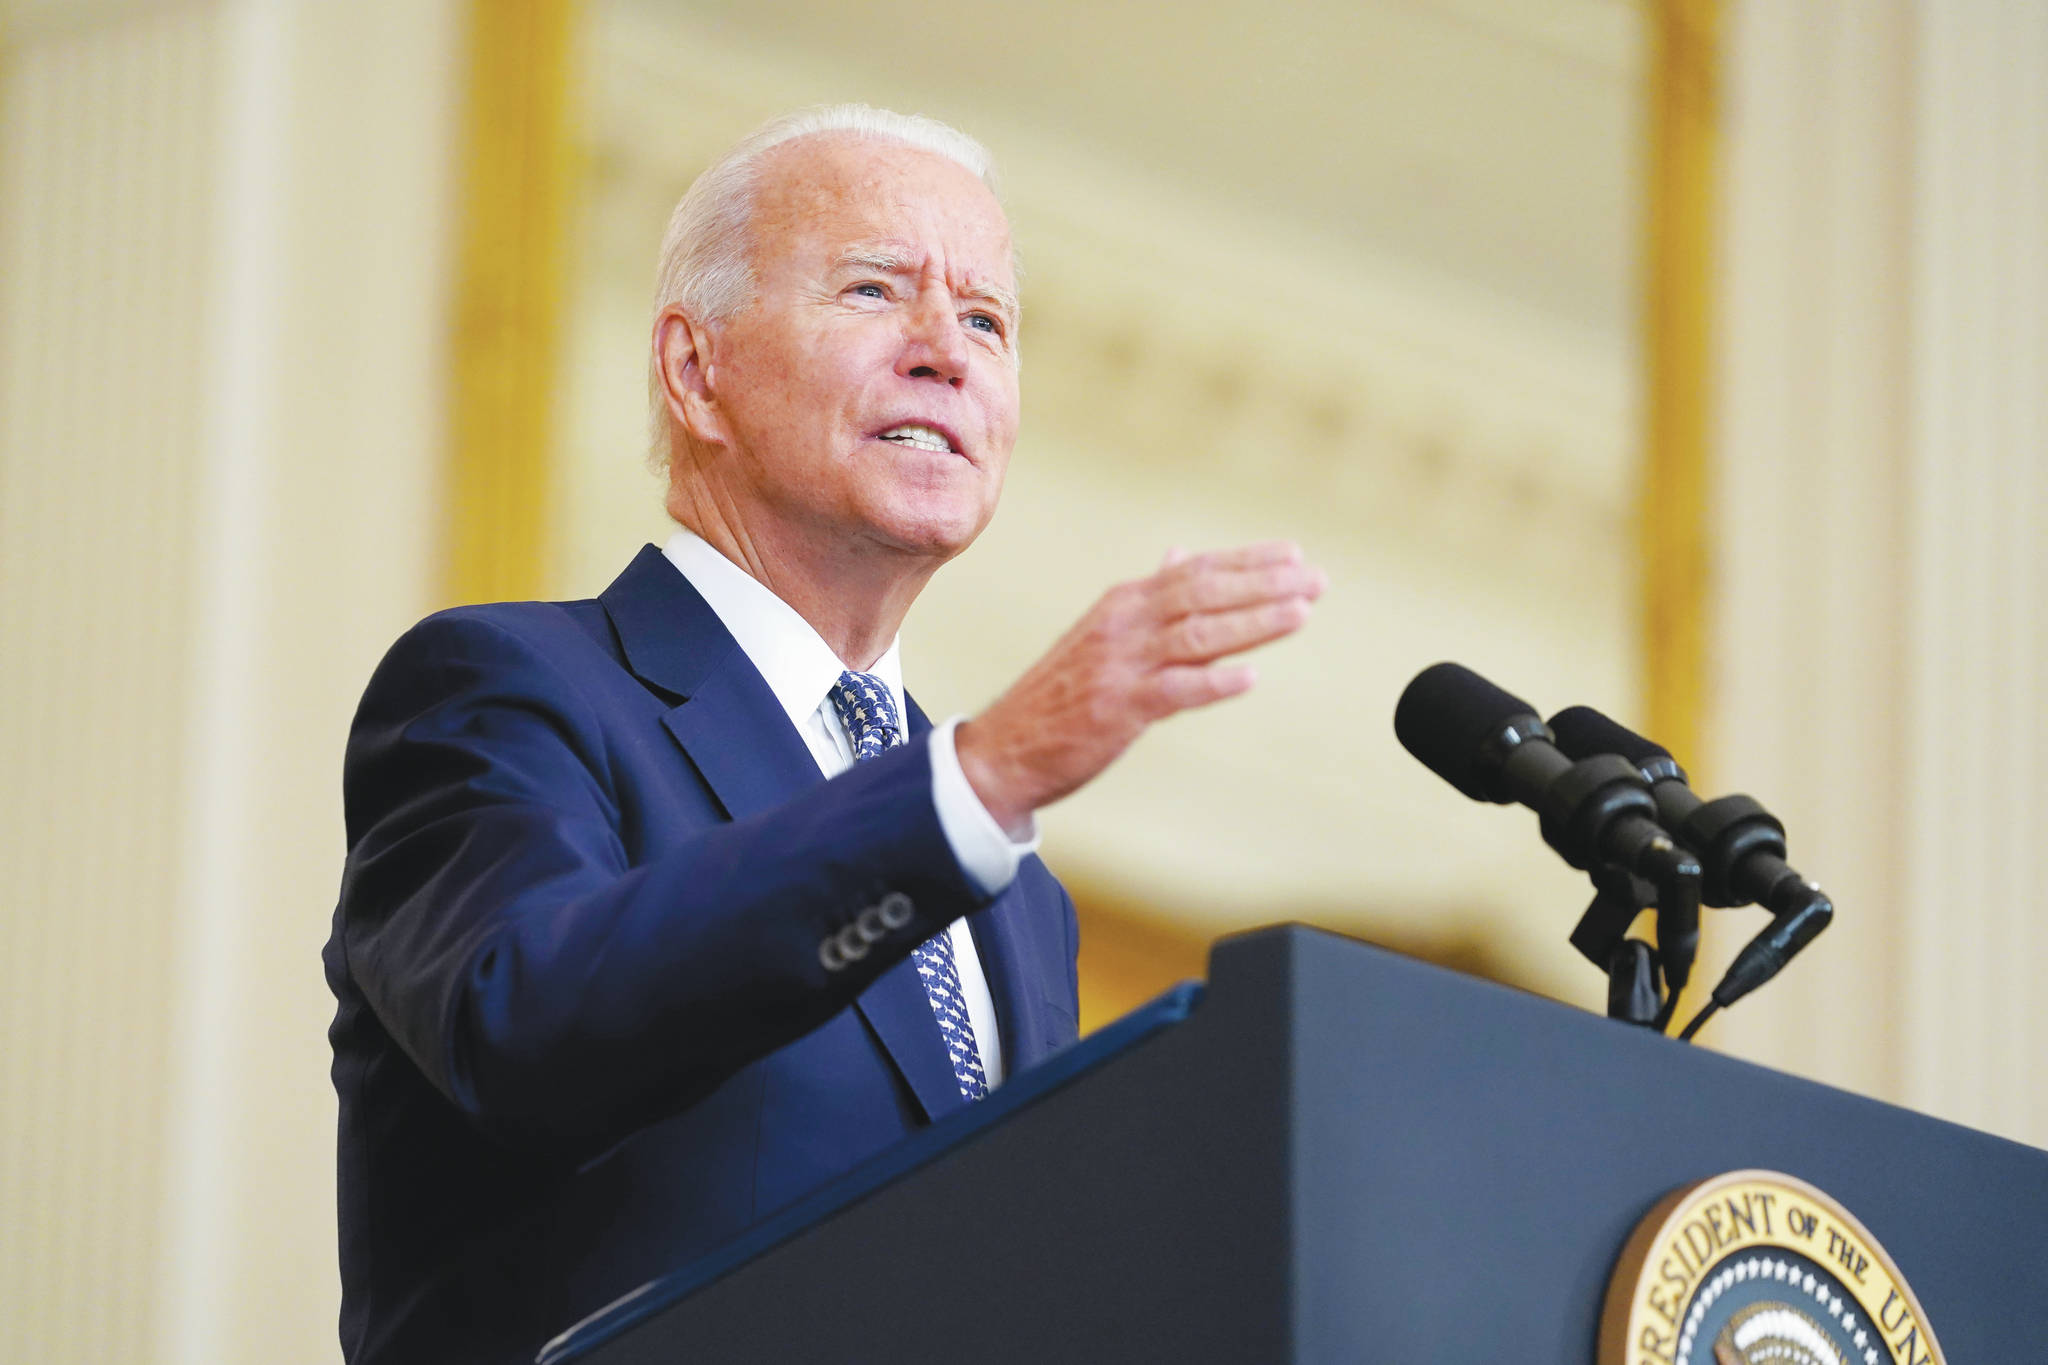 Associated Press
President Joe Biden speaks about the bipartisan infrastructure bill from the East Room of the White House in Washington on Tuesday.